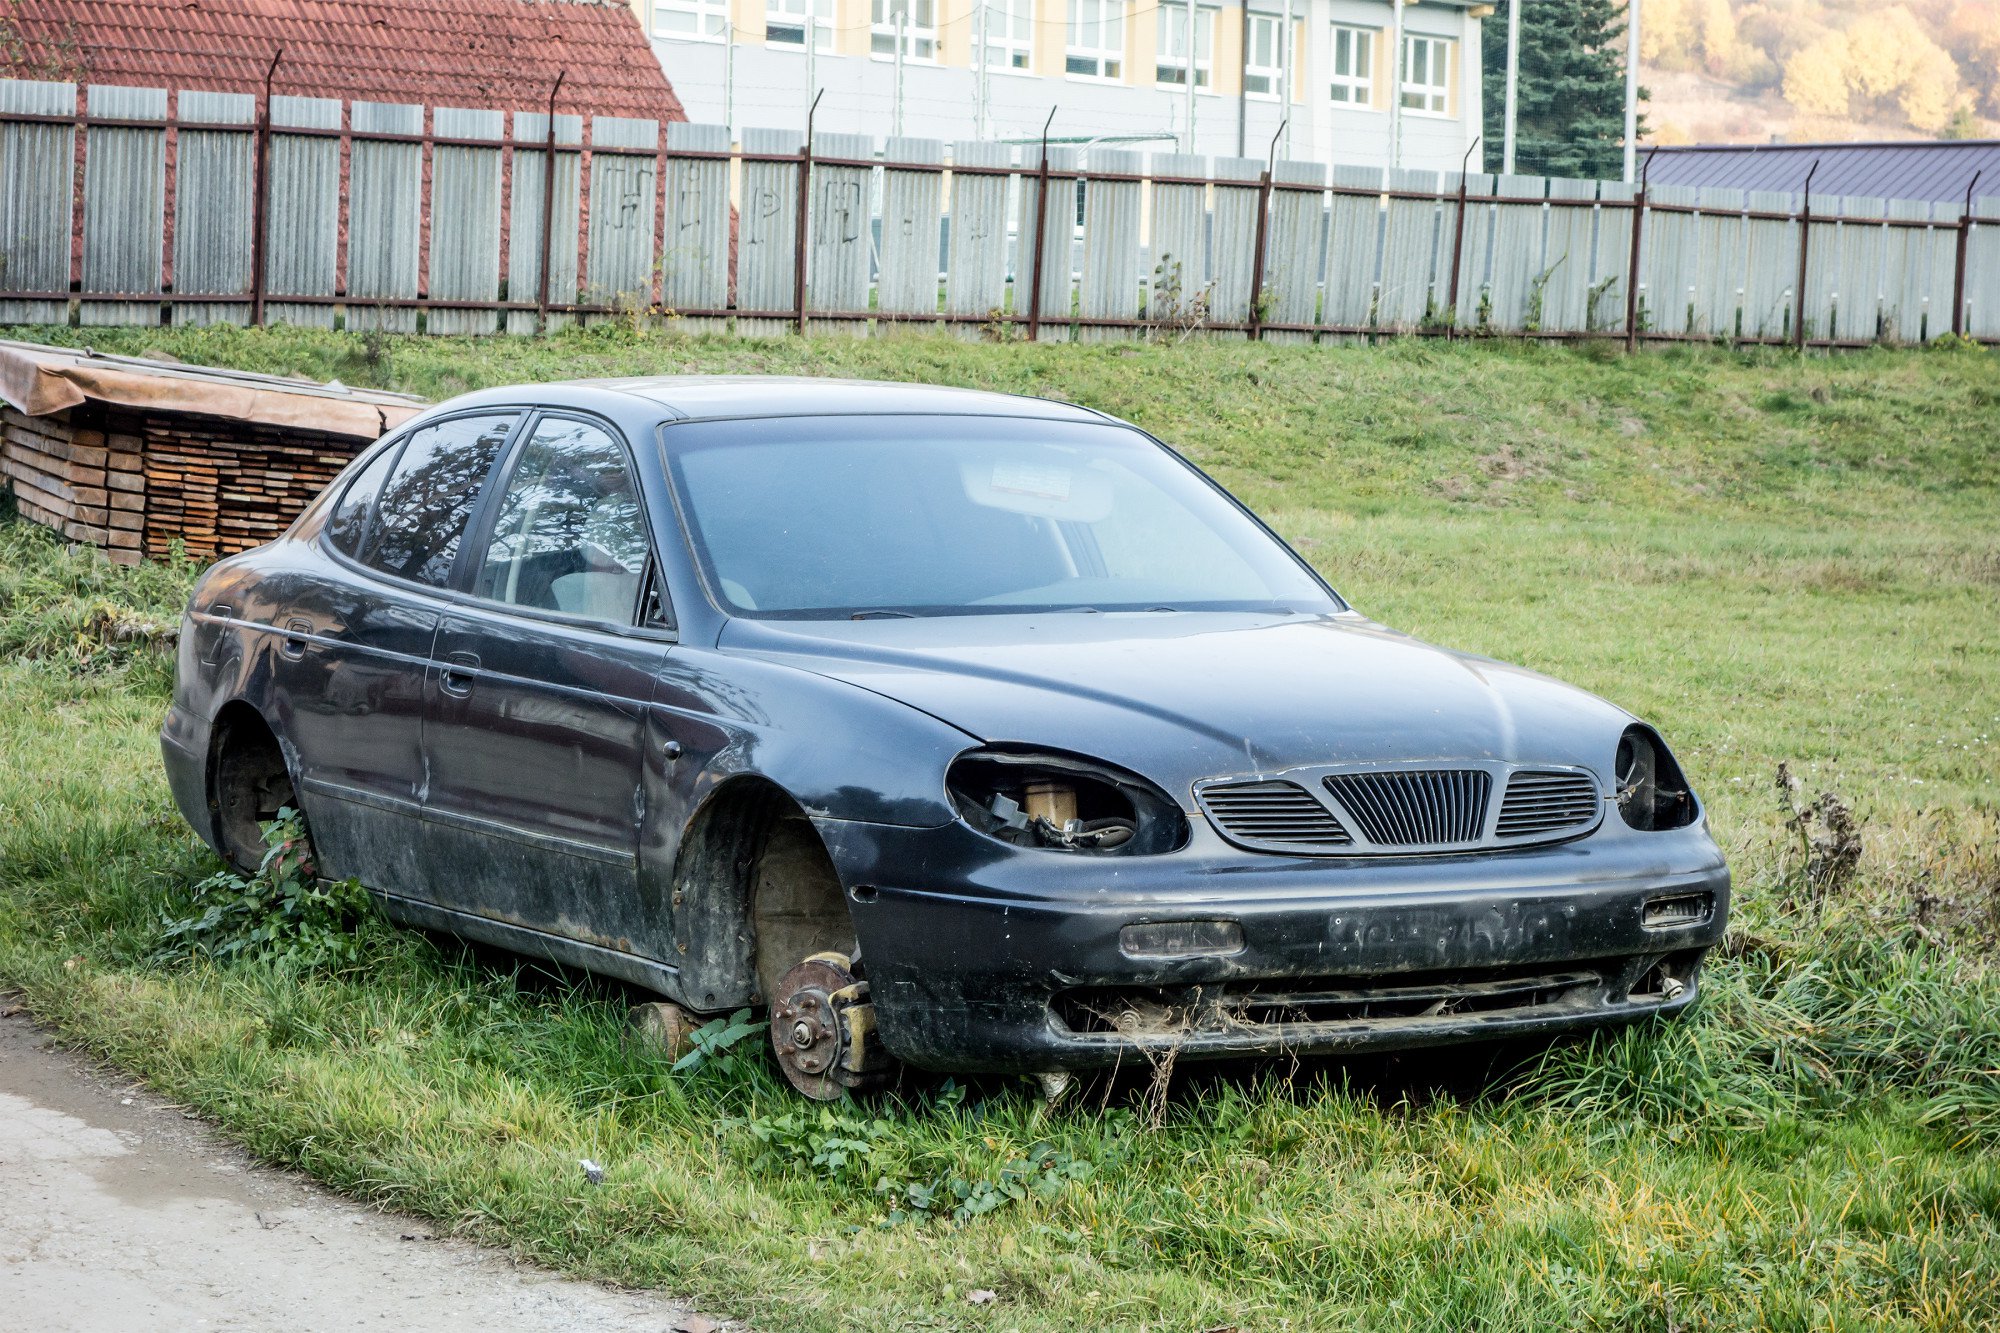 Sell Car For Scrap? 9 Reasons to Consider Scrapping Your Automobile